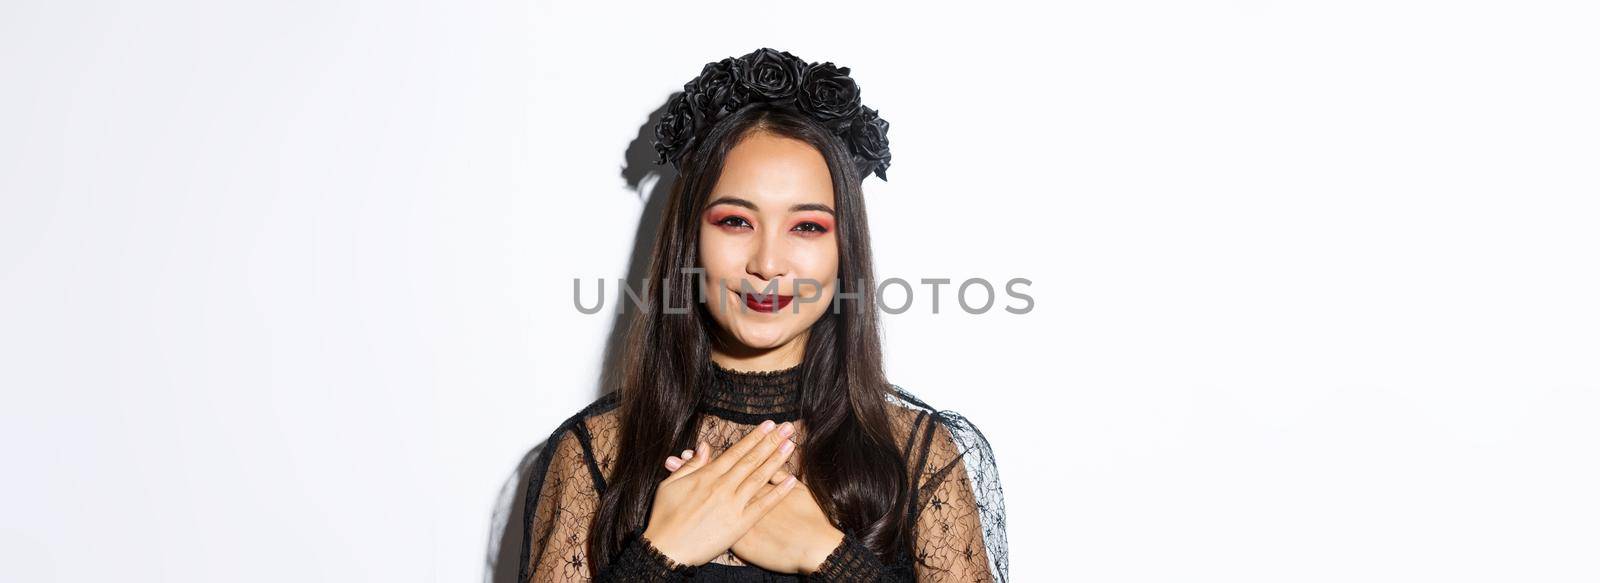 Close-up of thankful smiling asian woman looking grateful with hands over chest, standing in witch costume over white background.